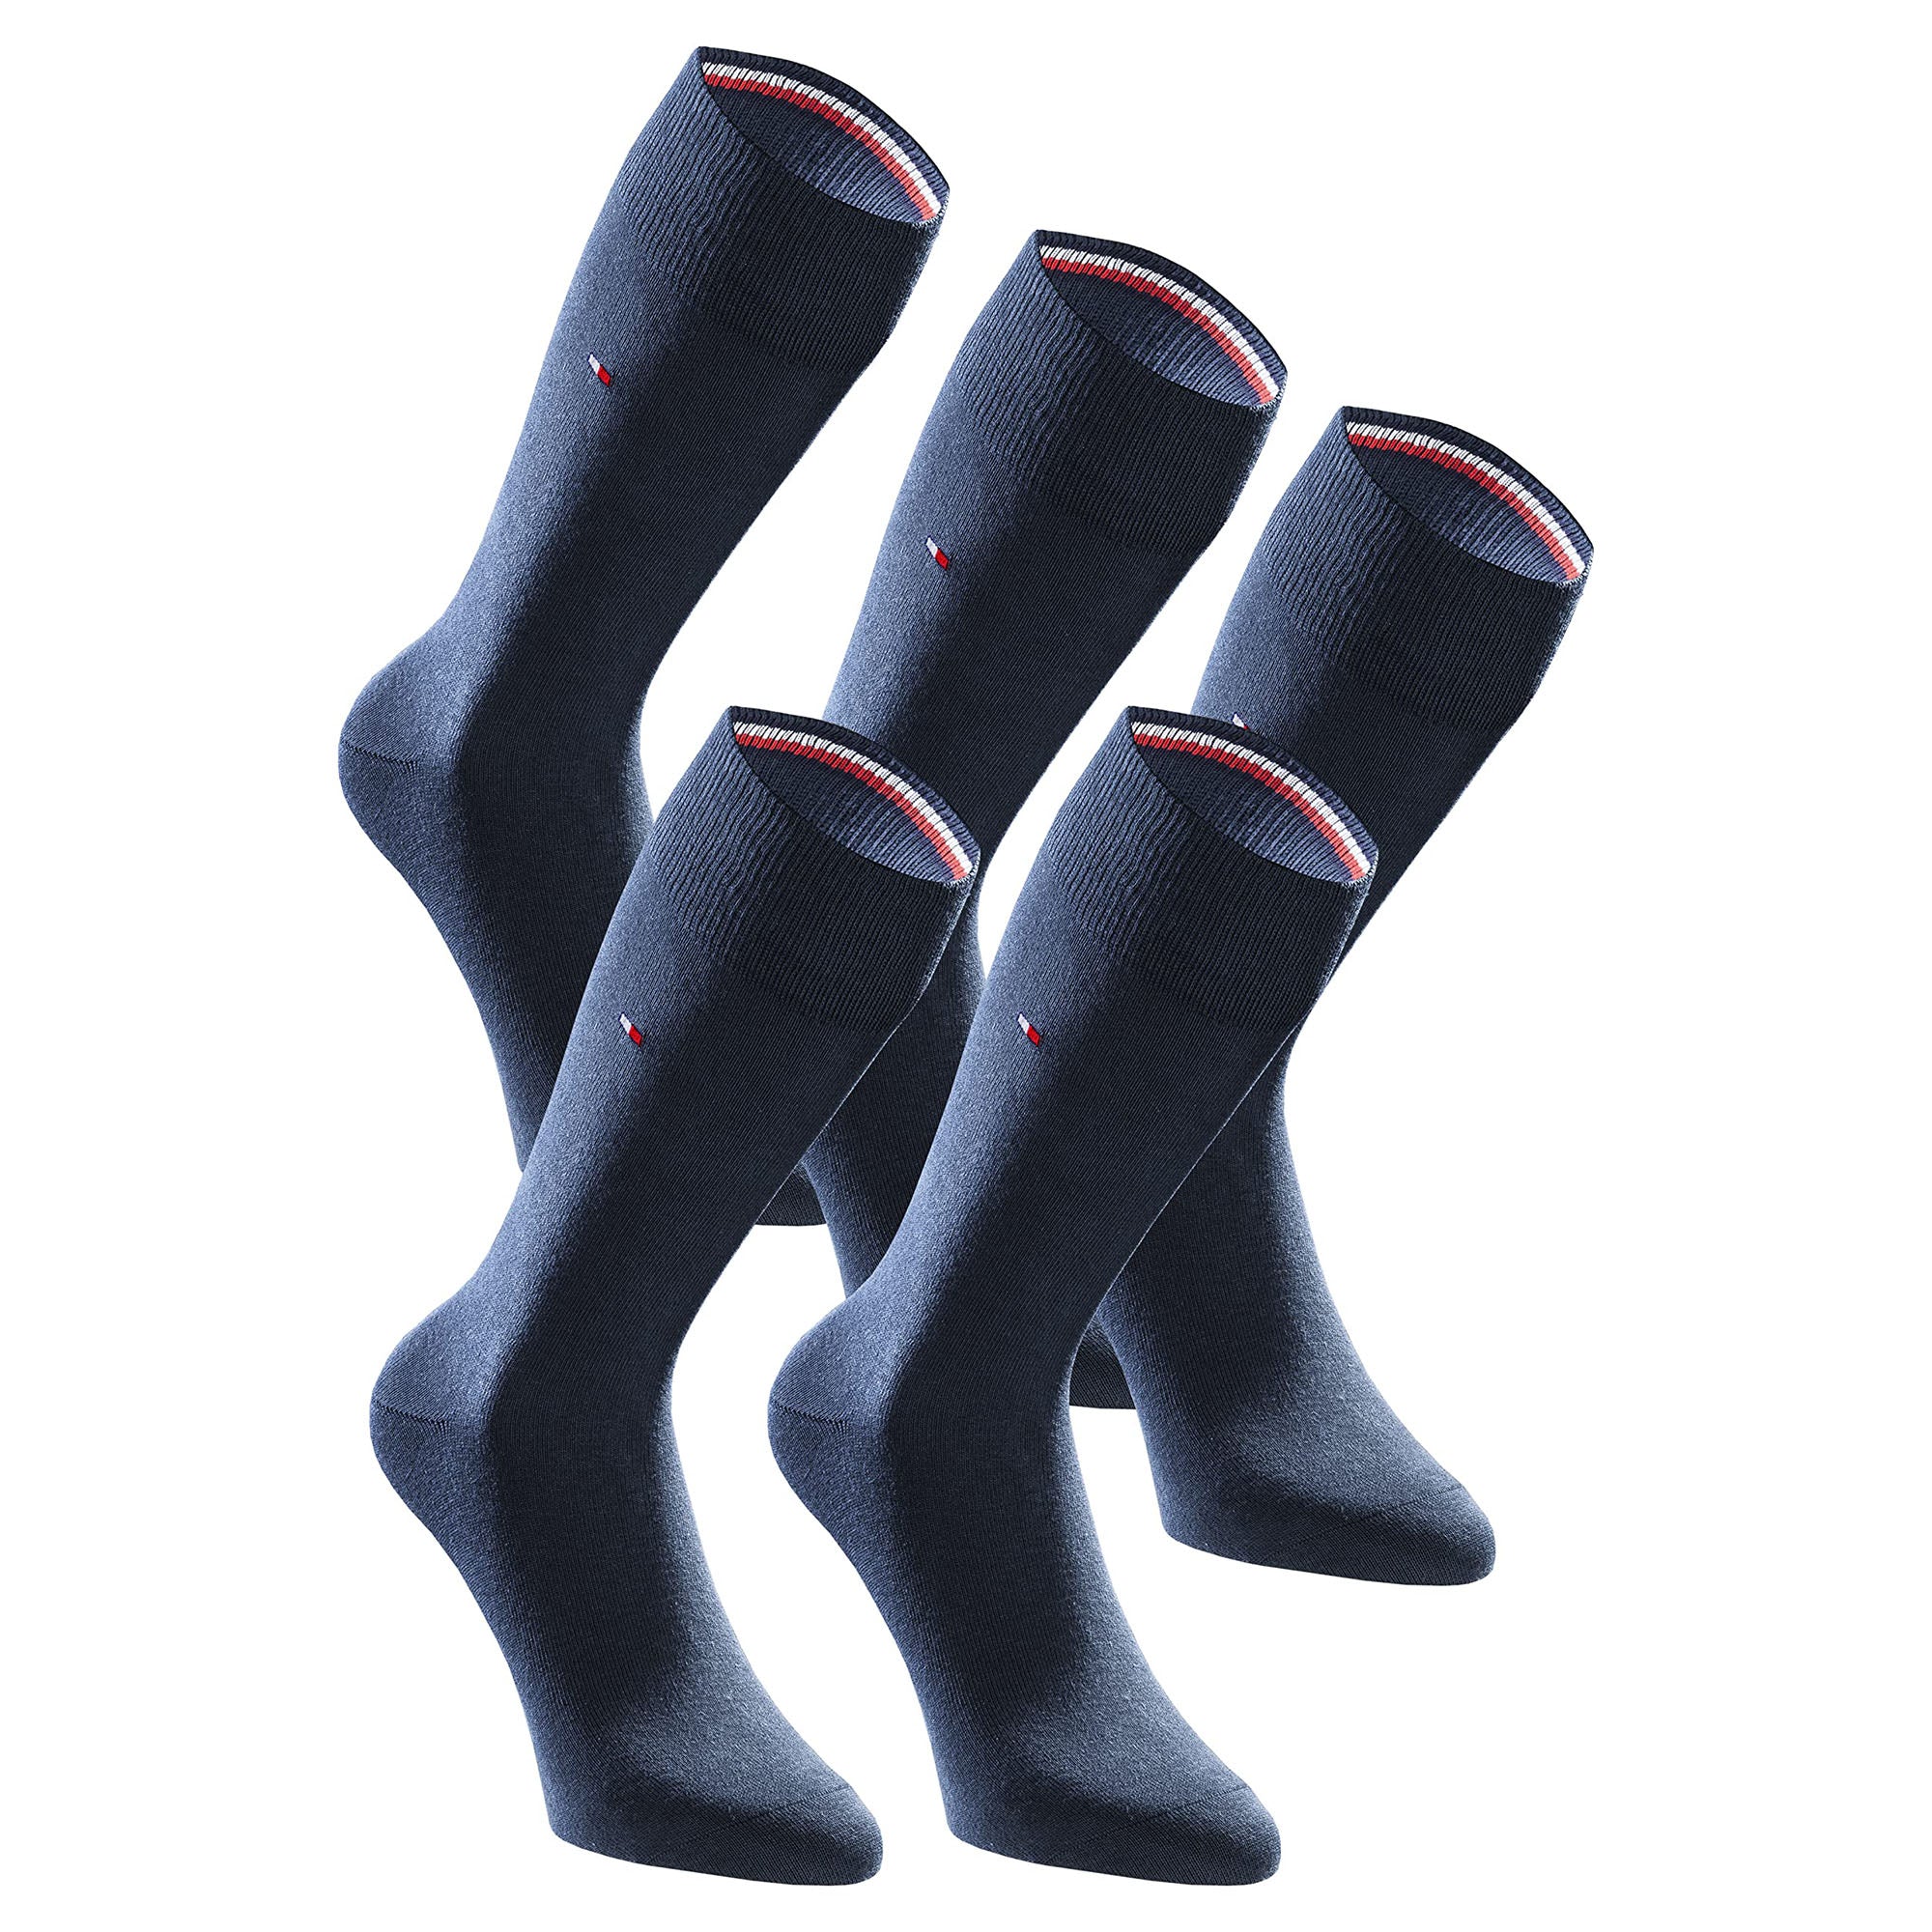 Hilfiger Socken Tommy Pack Paar – 5 YOUVERS Business